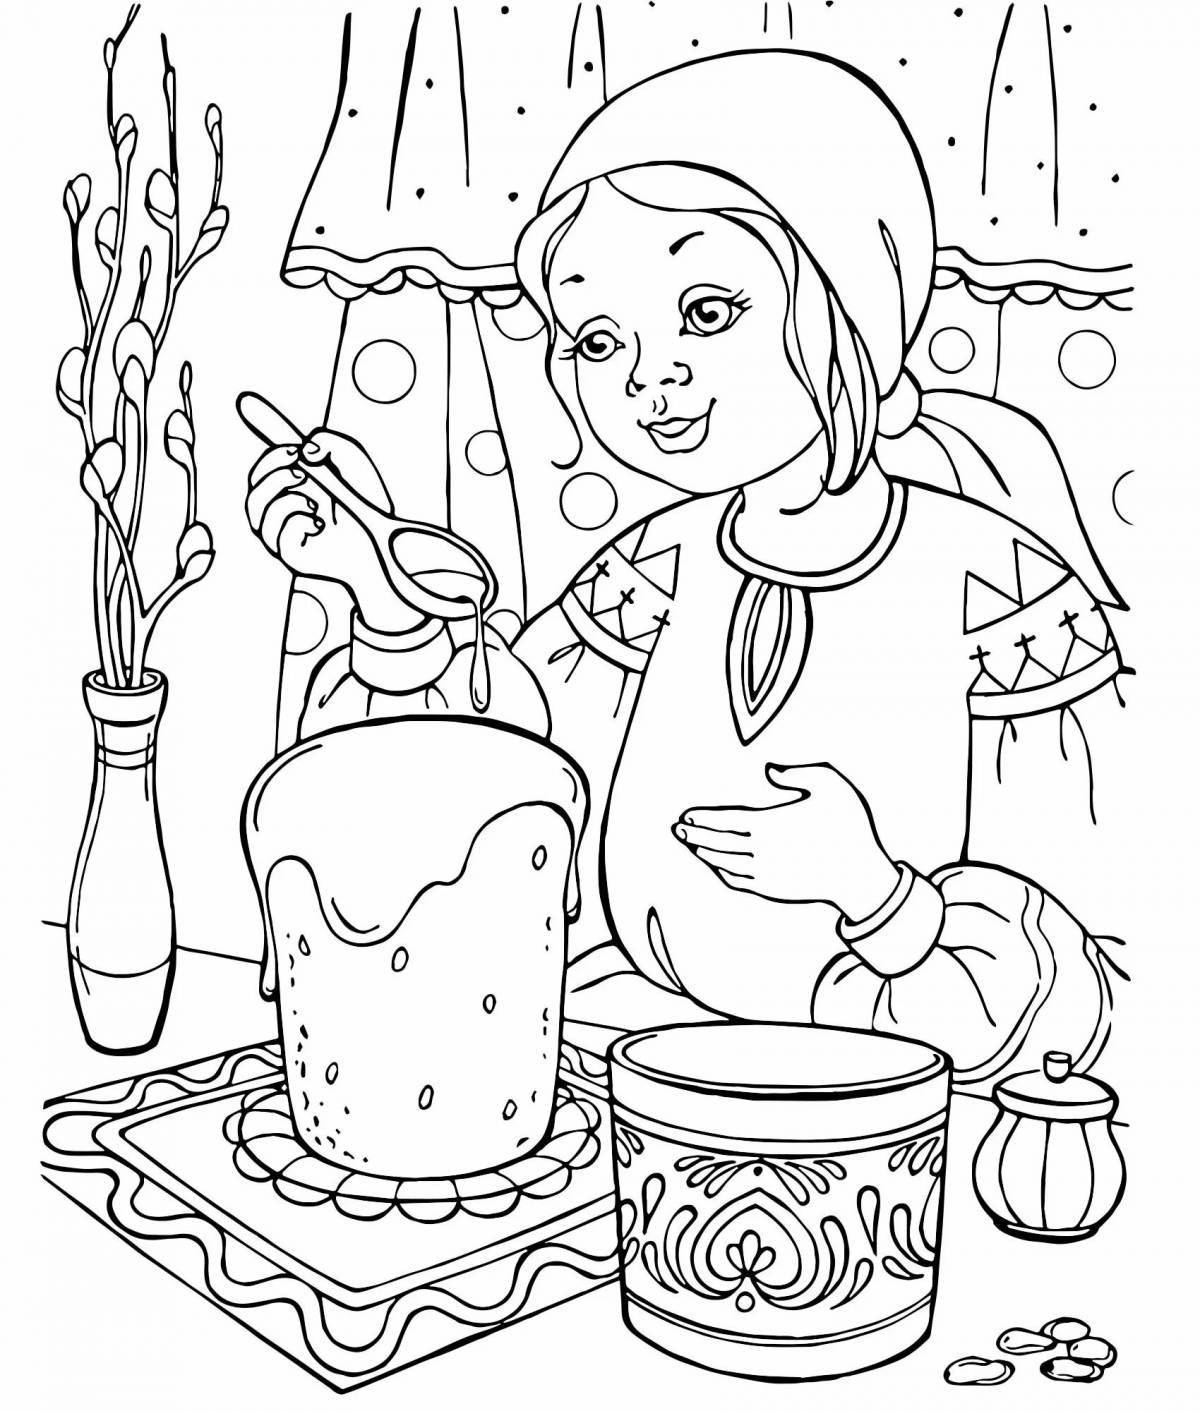 Playful orthodox coloring book